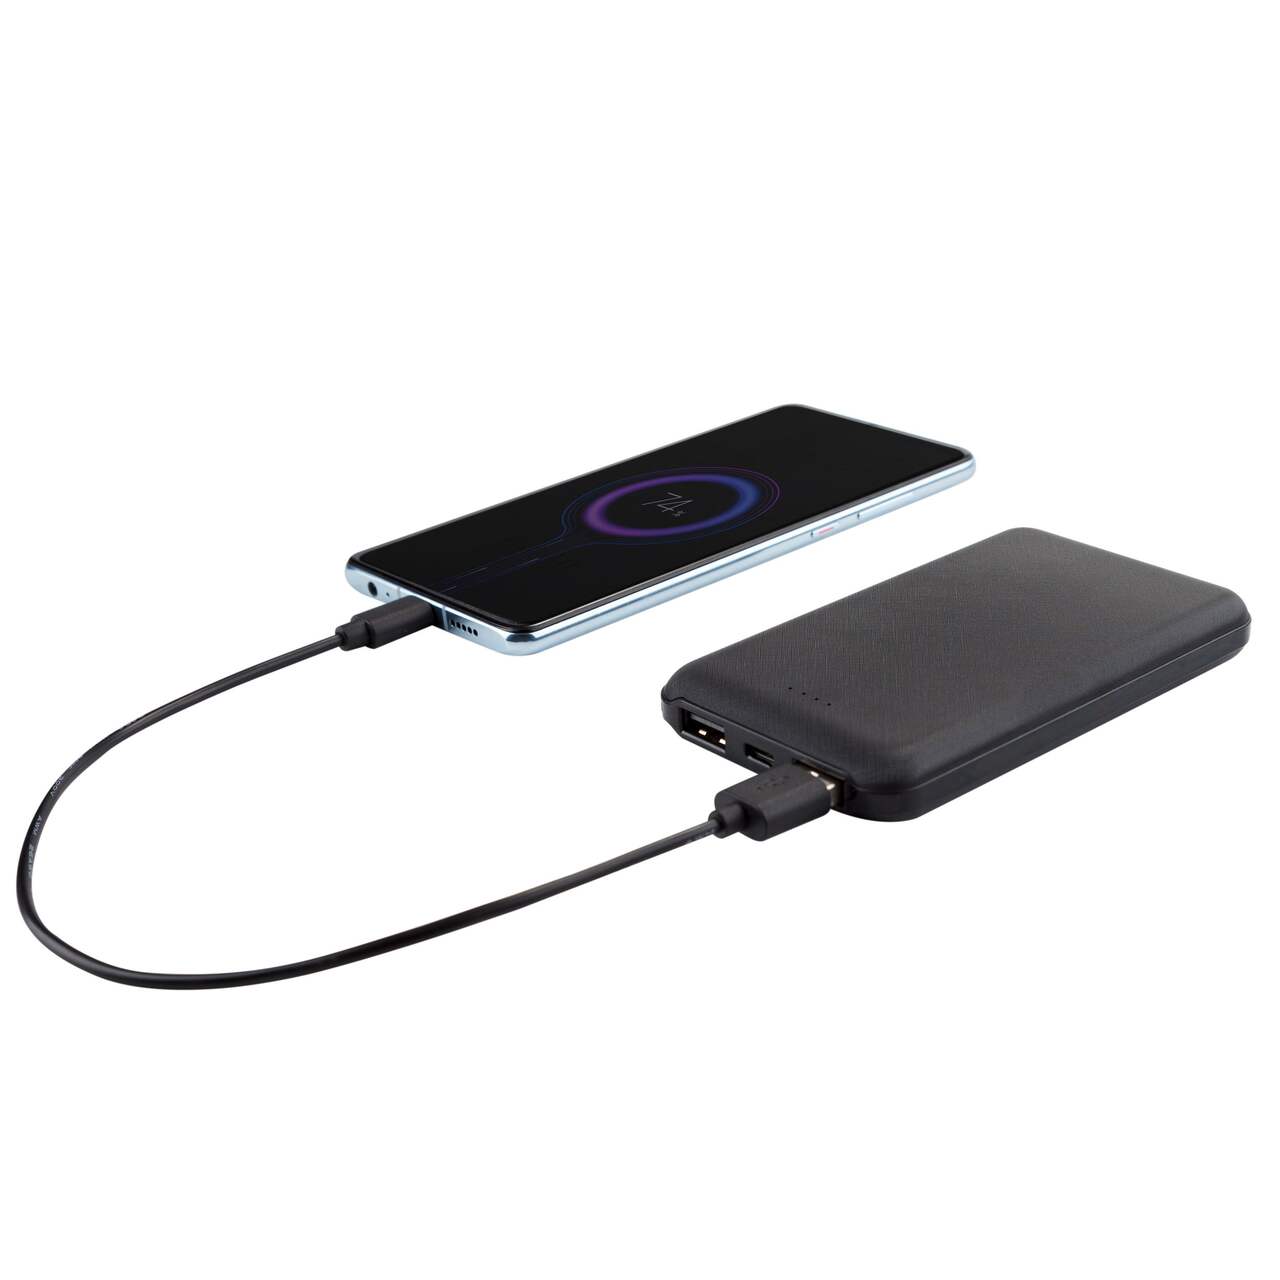 Bluehive 8,000 mAh Power Bank with Battery Charge Indicator